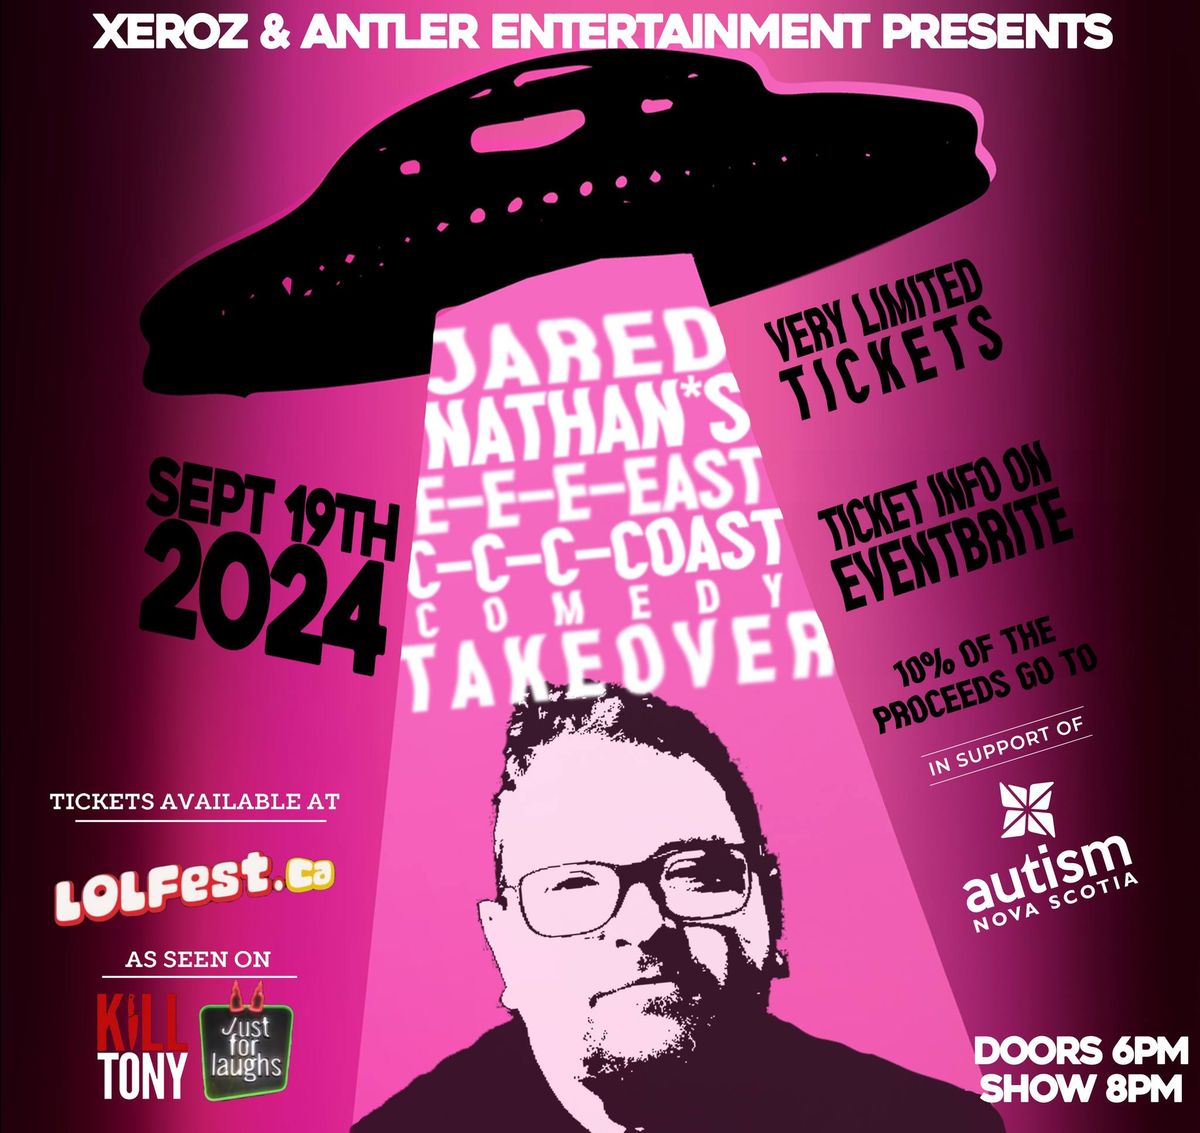 Jared Nathan's E-E-East C-C-Coast Comedy Takeover (LIMITED TICKETS)